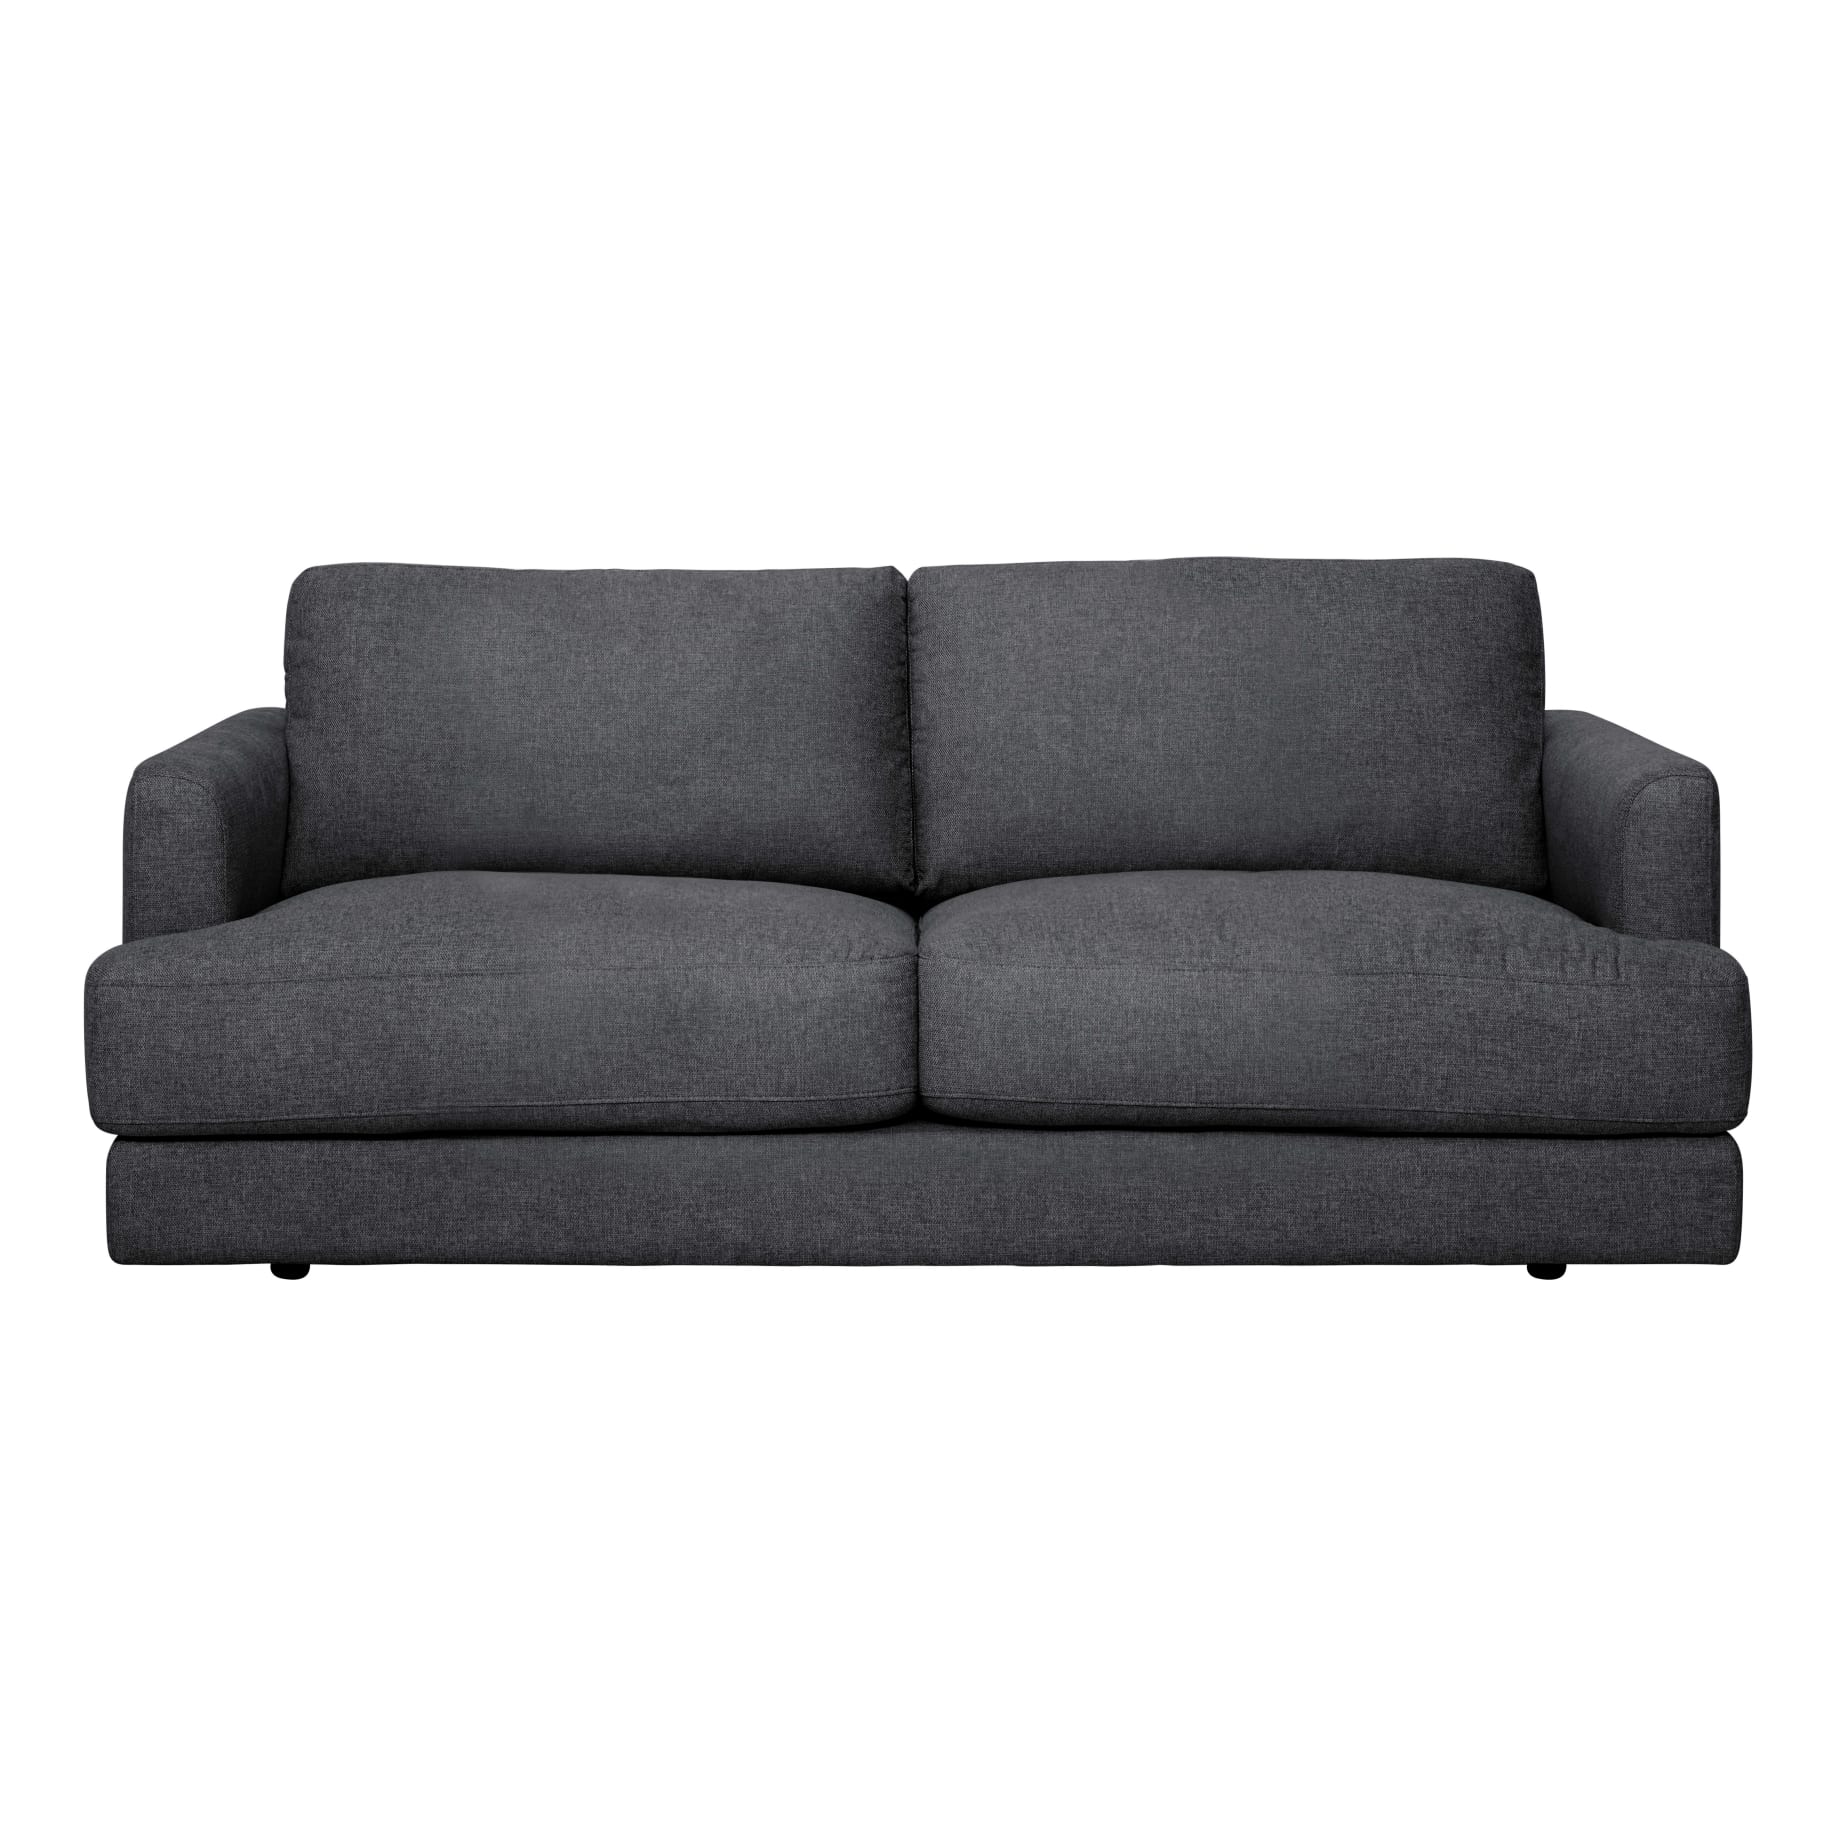 Temple 3 Seater Sofa with 2 Cushion in Belfast Charcoal